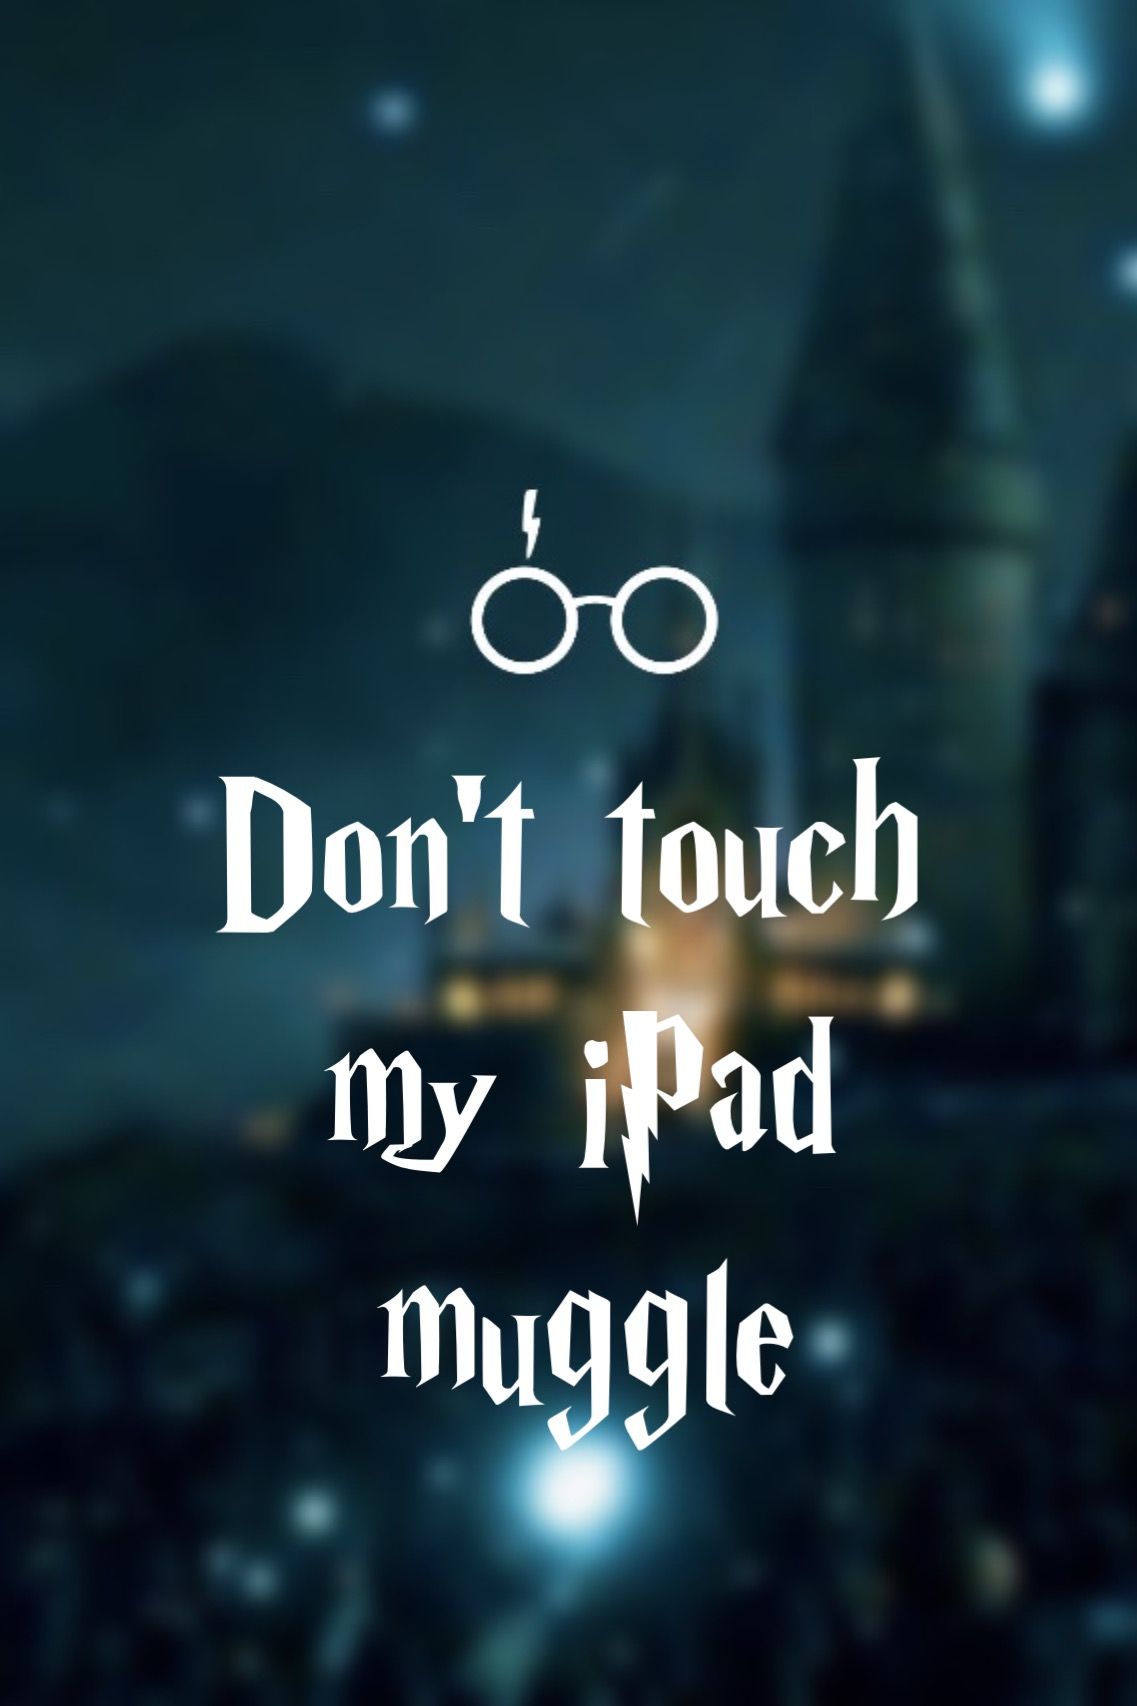 Aesthetic Harry Potter iPad Wallpapers - Wallpaper Cave